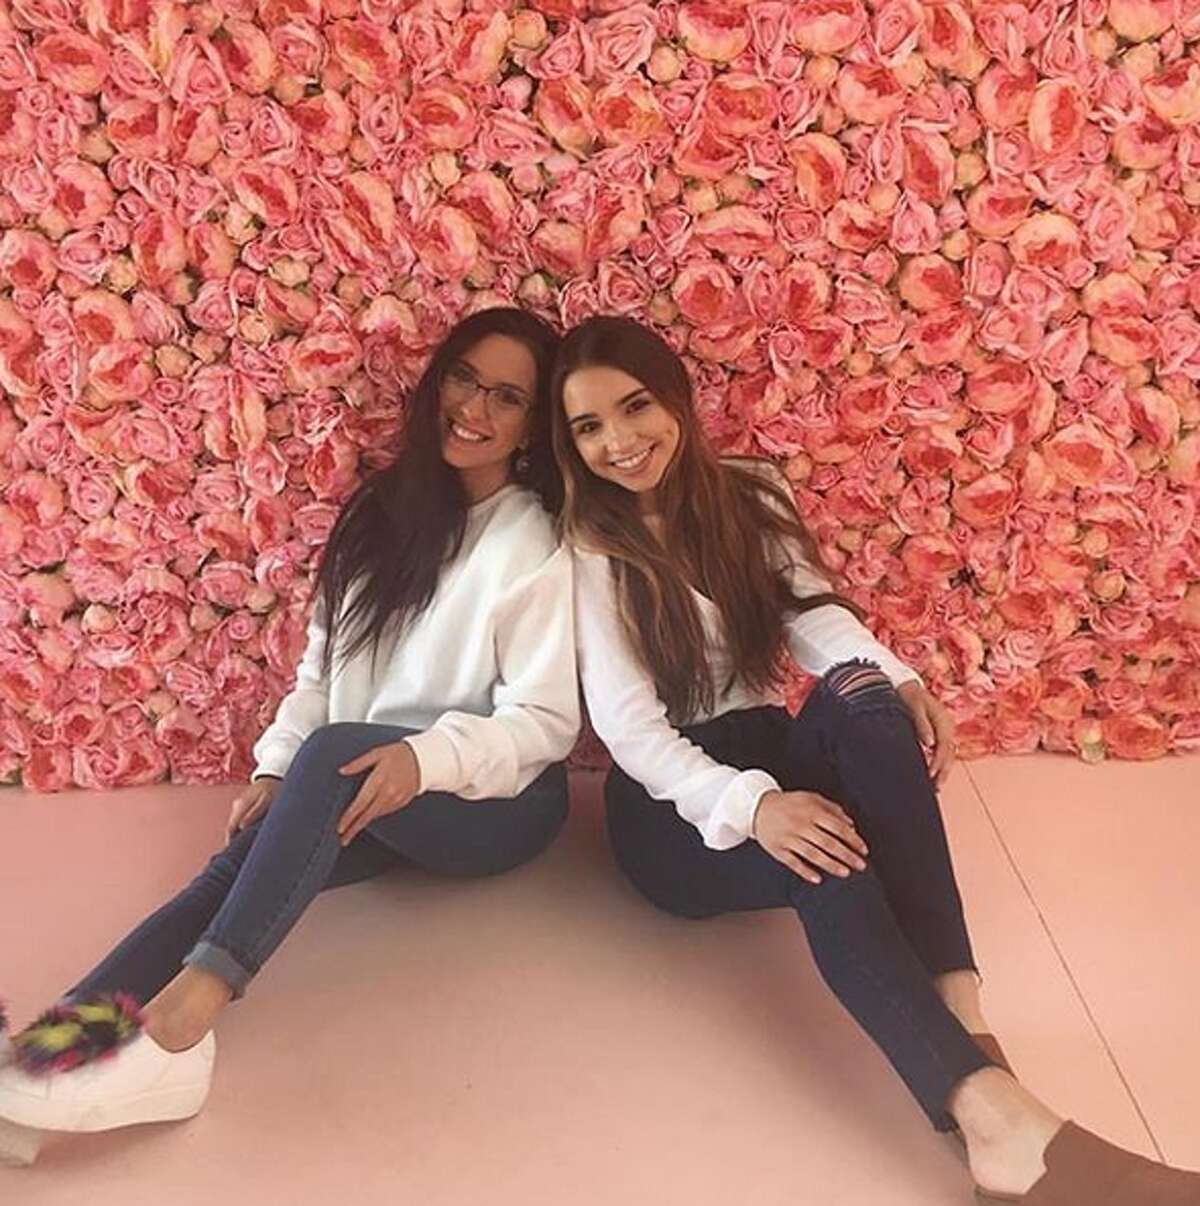 Flower Vault, at 20626 Stone Oak Parkway, is a pop up that's pretty much an Instagram heaven. For $15 a person (kids are free) visitors can take advantage of five floral-themed rooms to shoot photos for an hour. Flower Vault welcomes professional and amateur photographers as well as friends who just want to up their Instagram aesthetic.